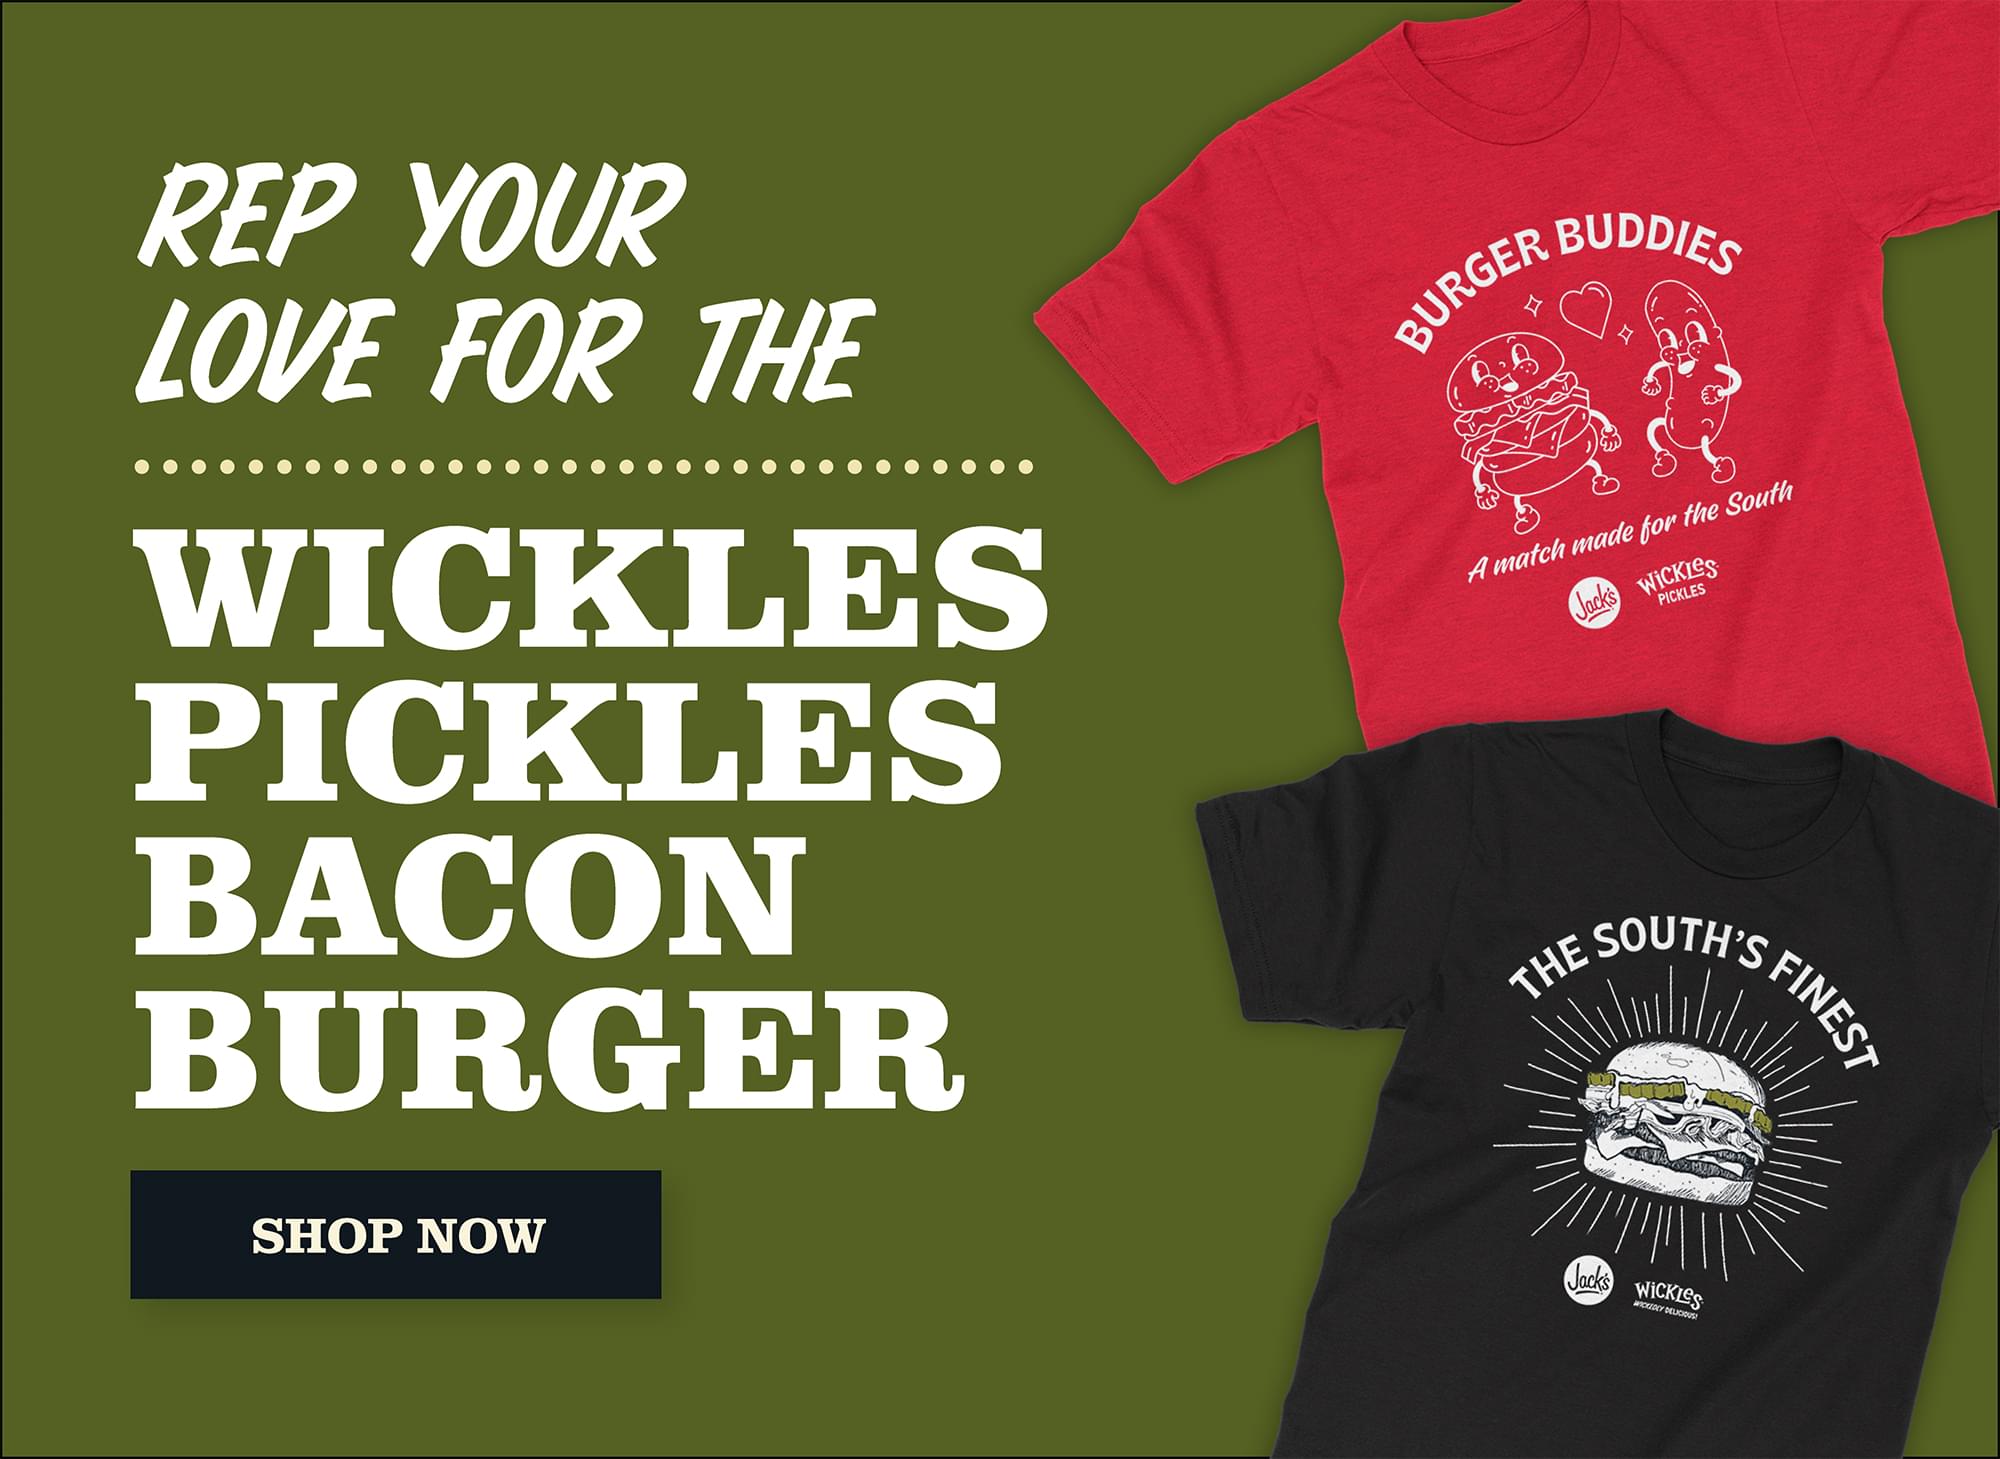 Rep your love for the Wickles Pickles Bacon Burger. Shop Now